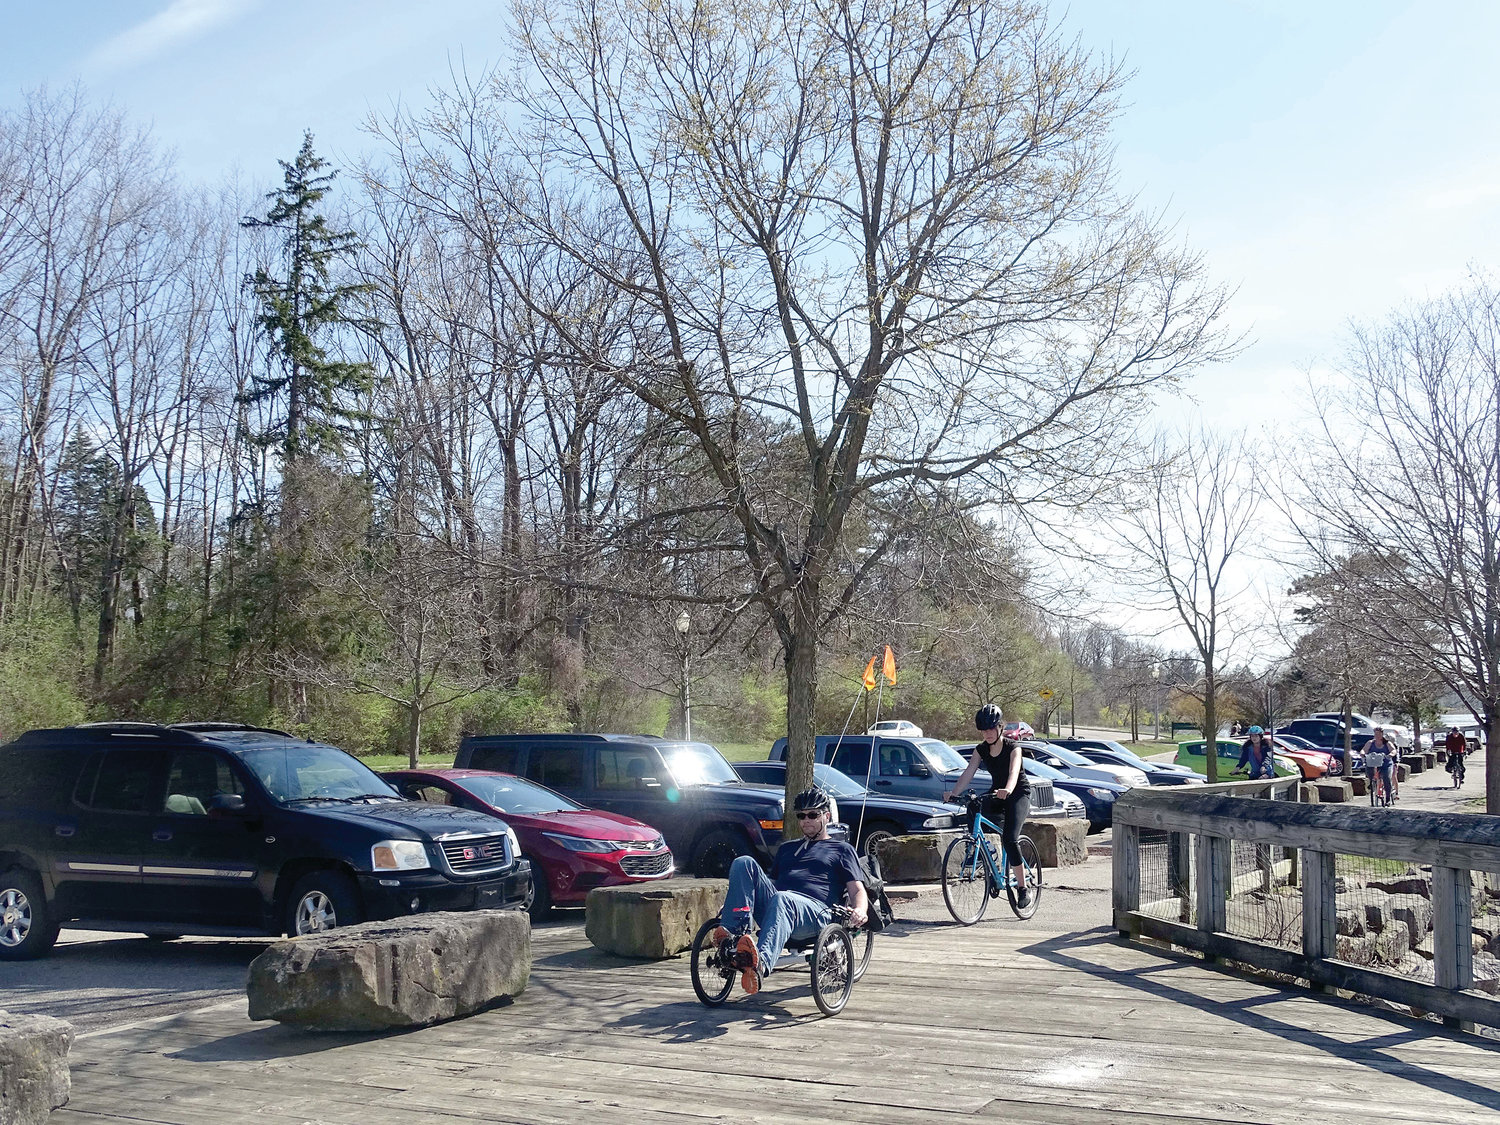 The riverside parking lot near Francis Park and adjoining trail were busy on the first warm Friday of spring.